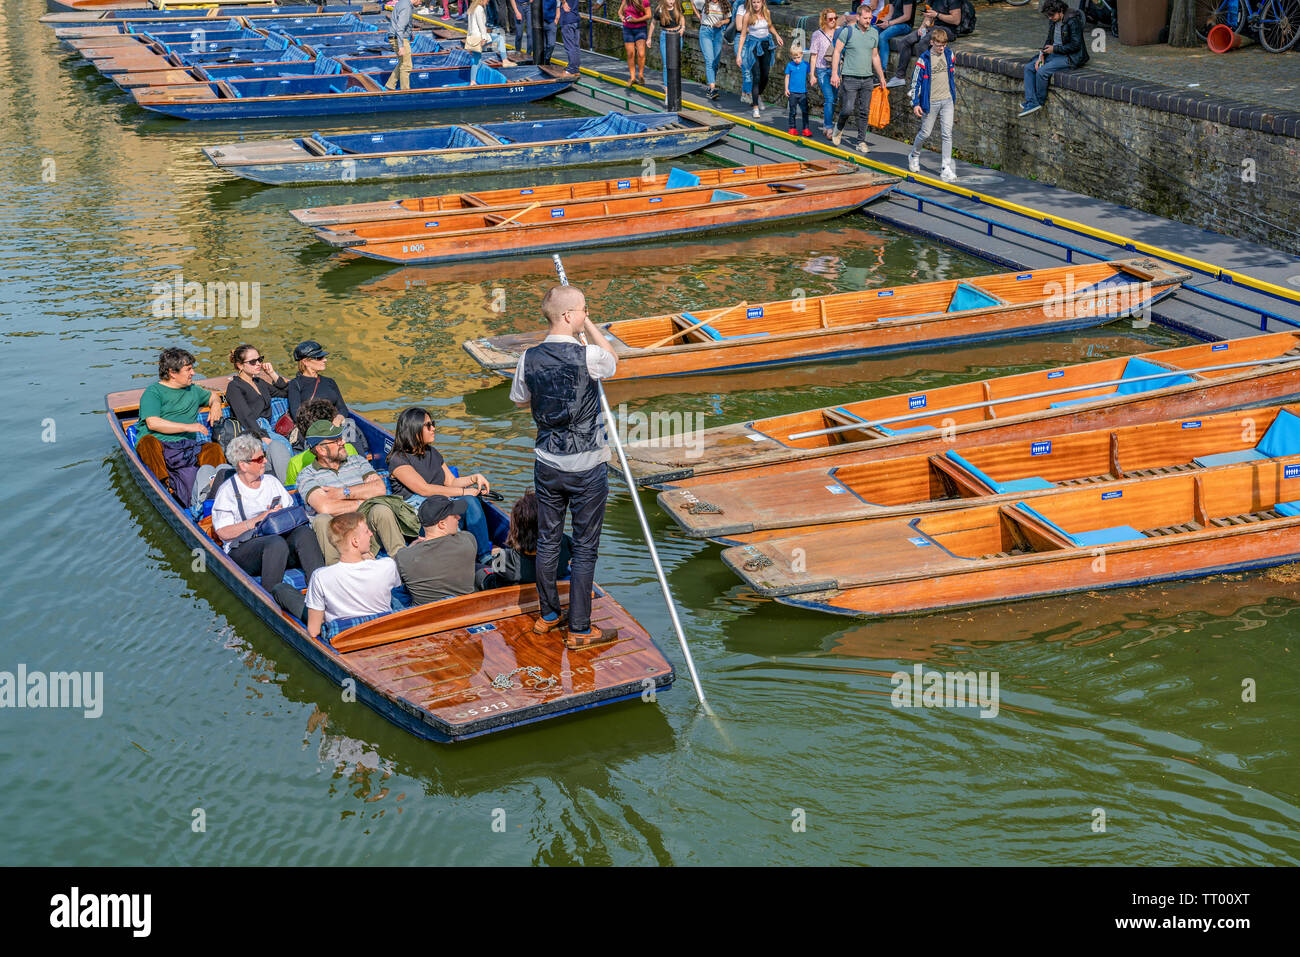 CAMBRIDGE, UNITED KINGDOM - APRIL 18: View of a traditional Punt boat giving a tour along the River Cam on April 18, 2019 Stock Photo